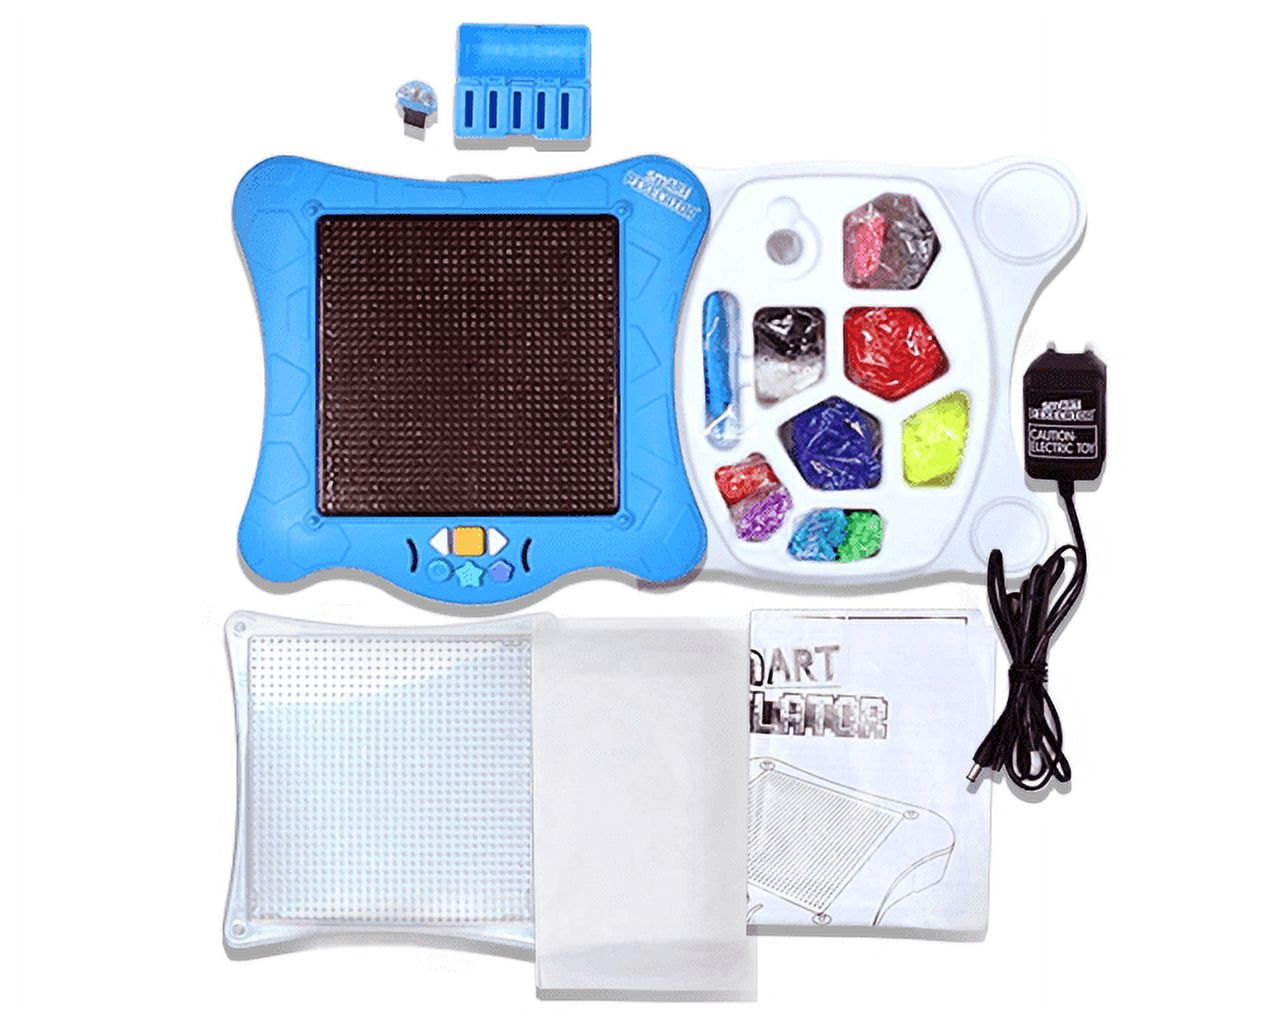 smART Pixelator: Create Your Own 3D Pixelated Art Projects, Gift for Kids,  Ages 7+